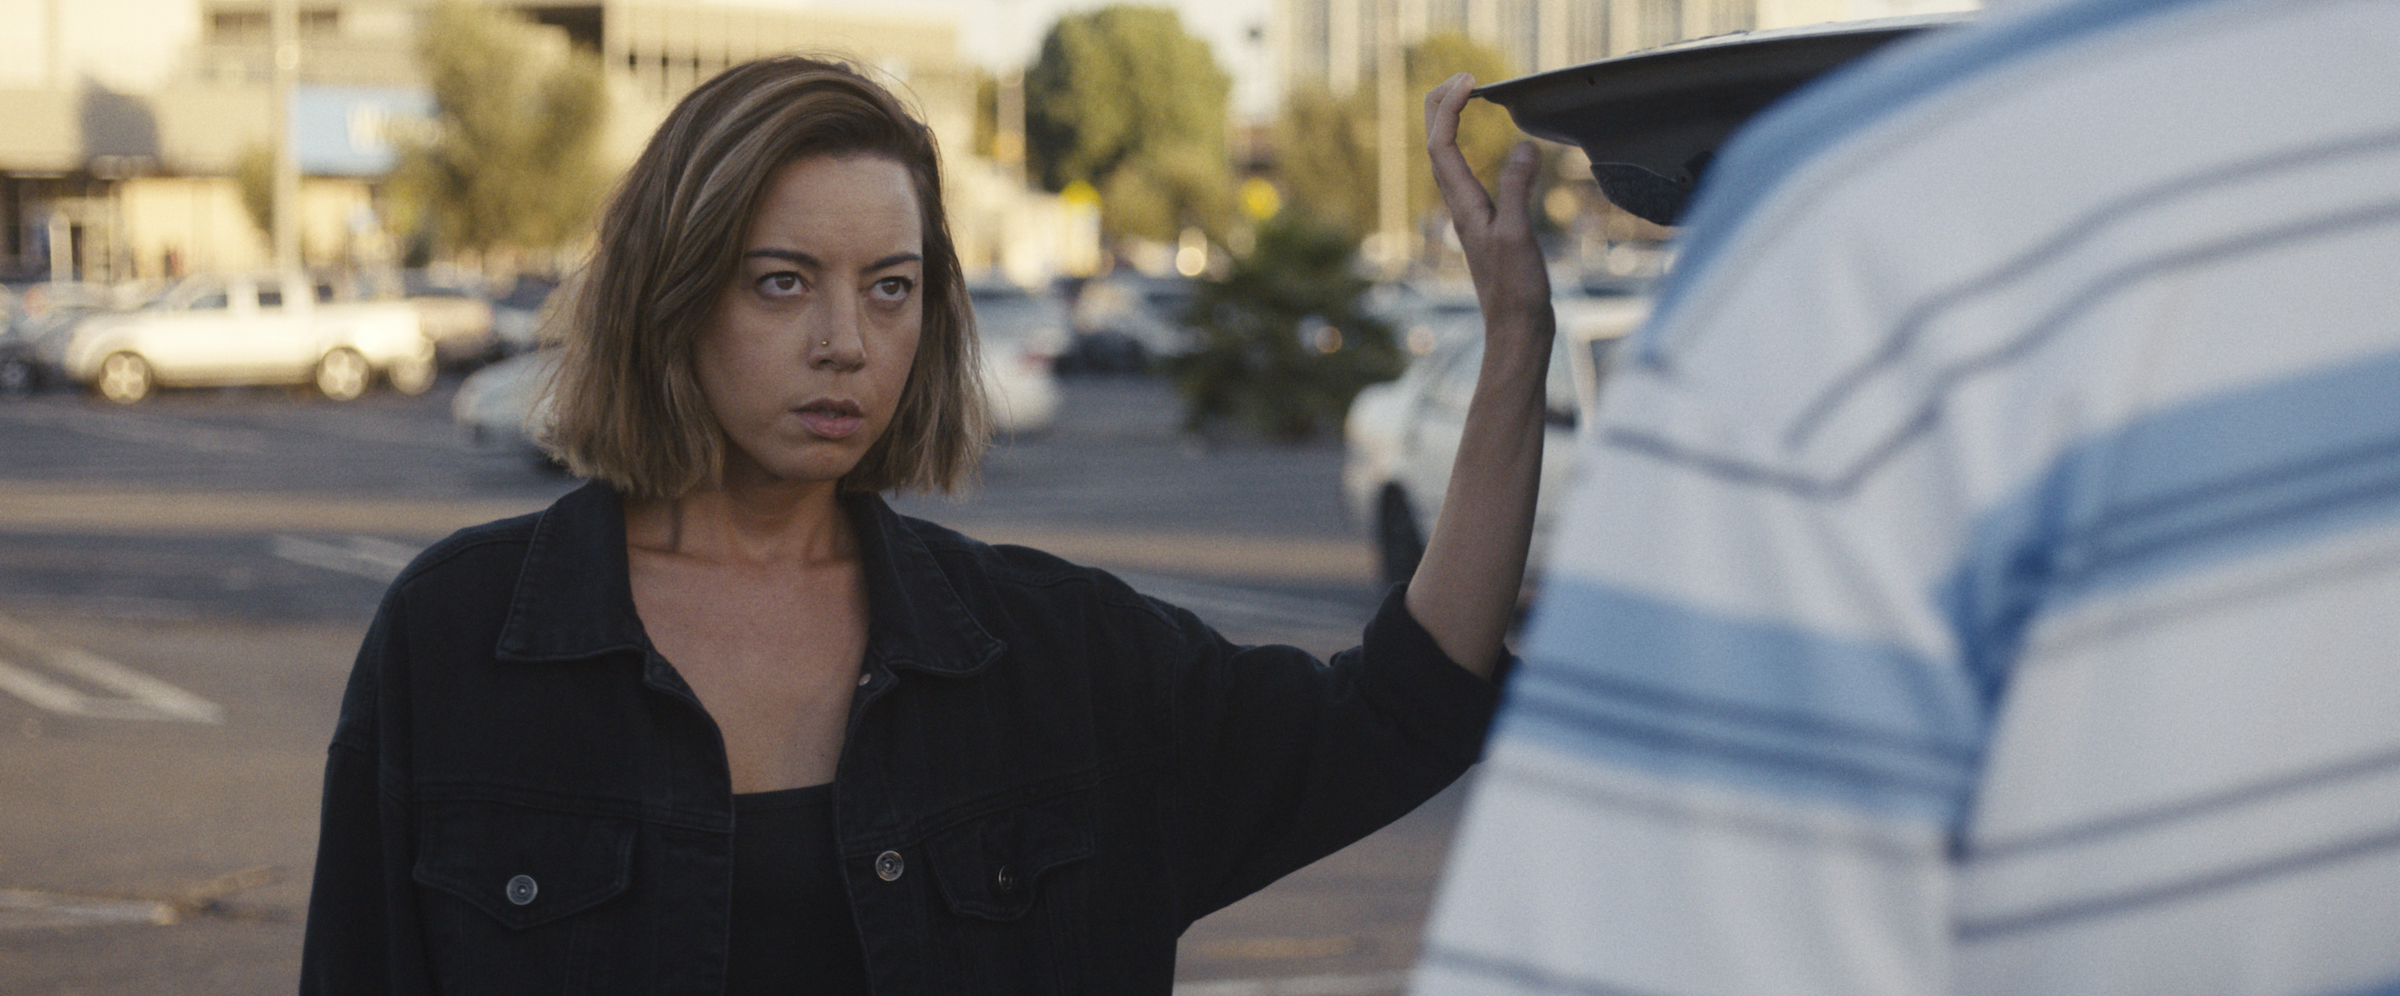 Aubrey Plaza in 'Emily the Criminal' (Courtesy of Roadside Attractions and Vertical Entertainment)